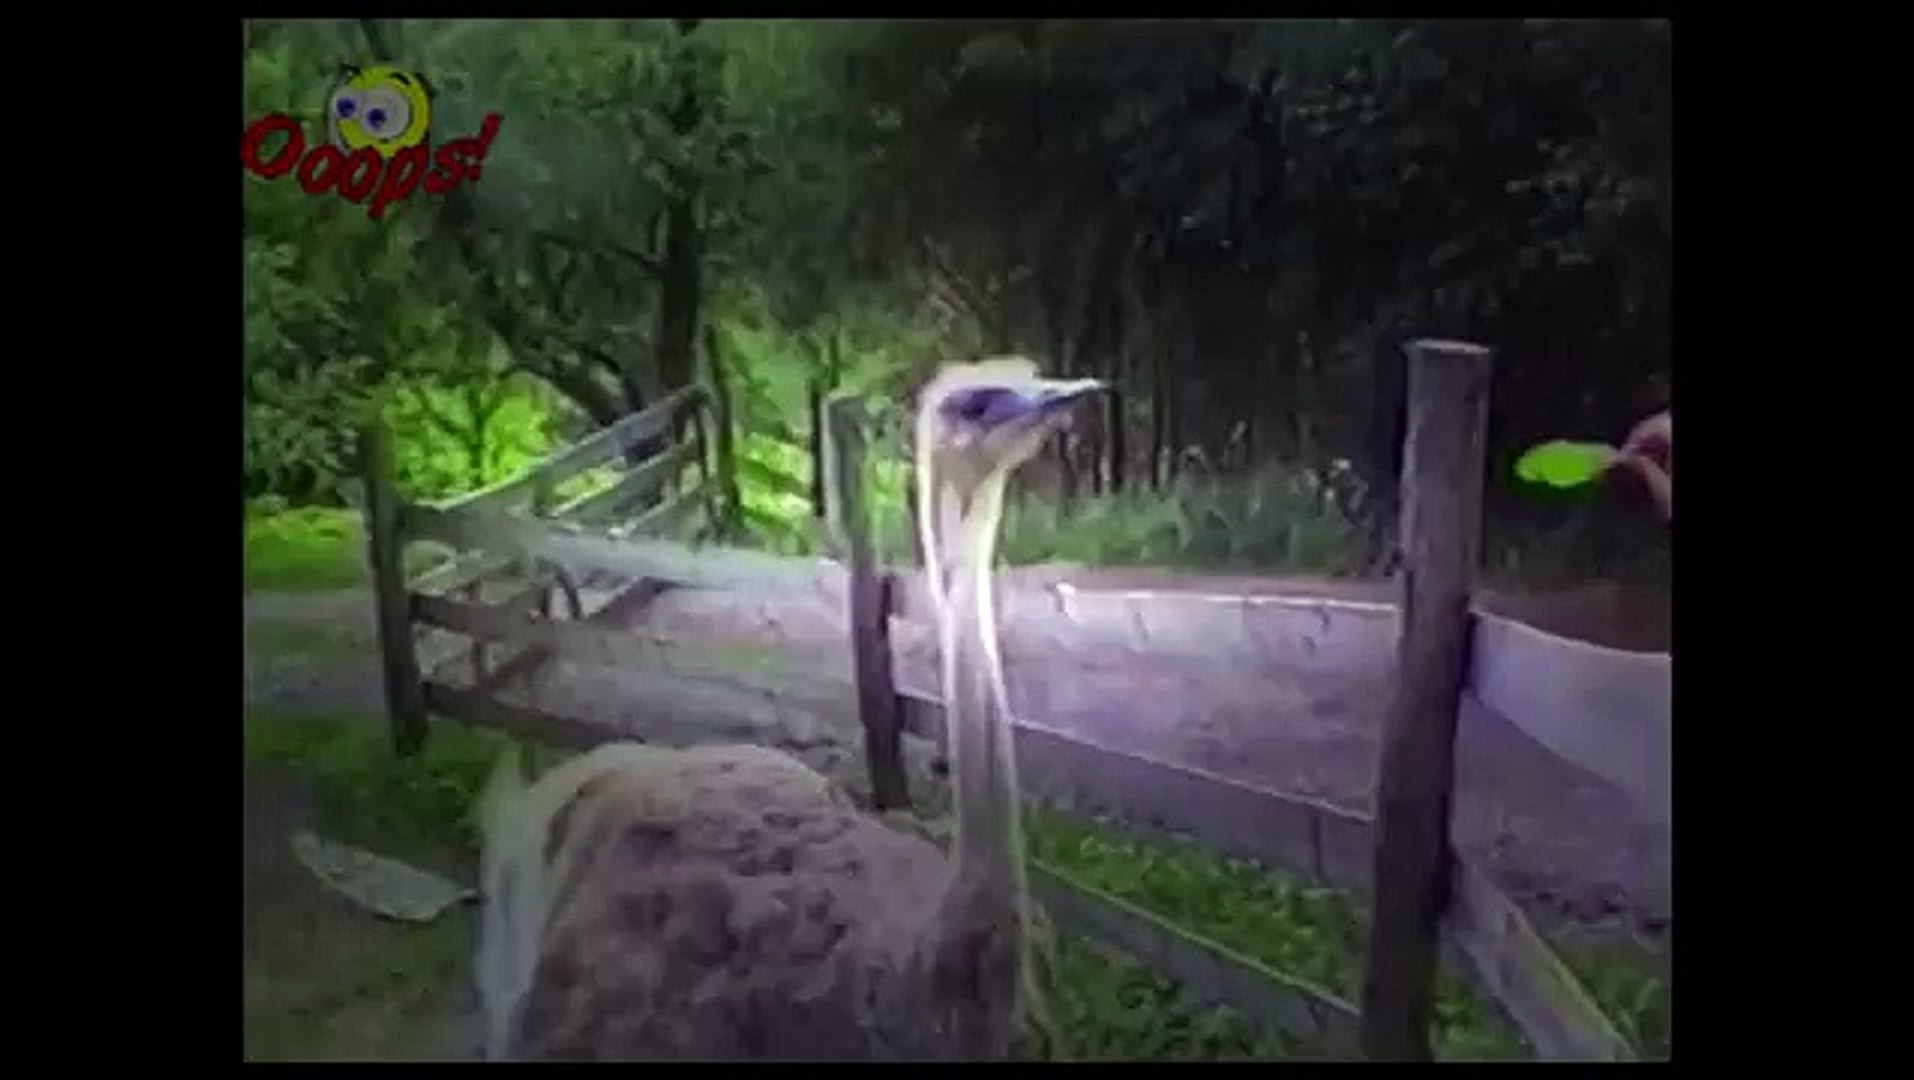 Funny Animals - Funny Animals Caught on Tape